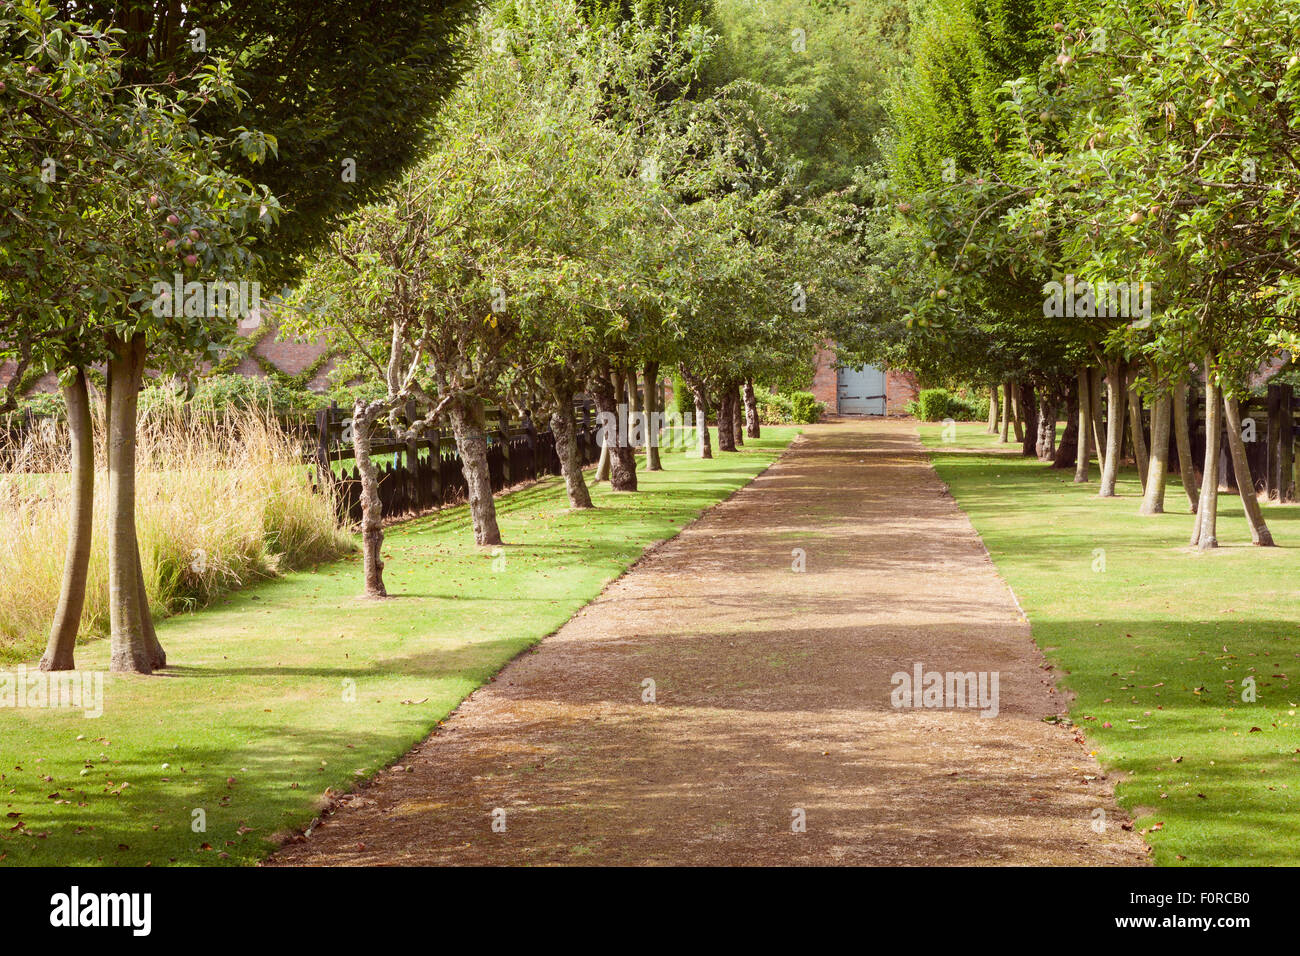 Elsham Hall Gardens and Country Park. Elsham, North Lincolnshire, UK. Summer, August 2015. Stock Photo